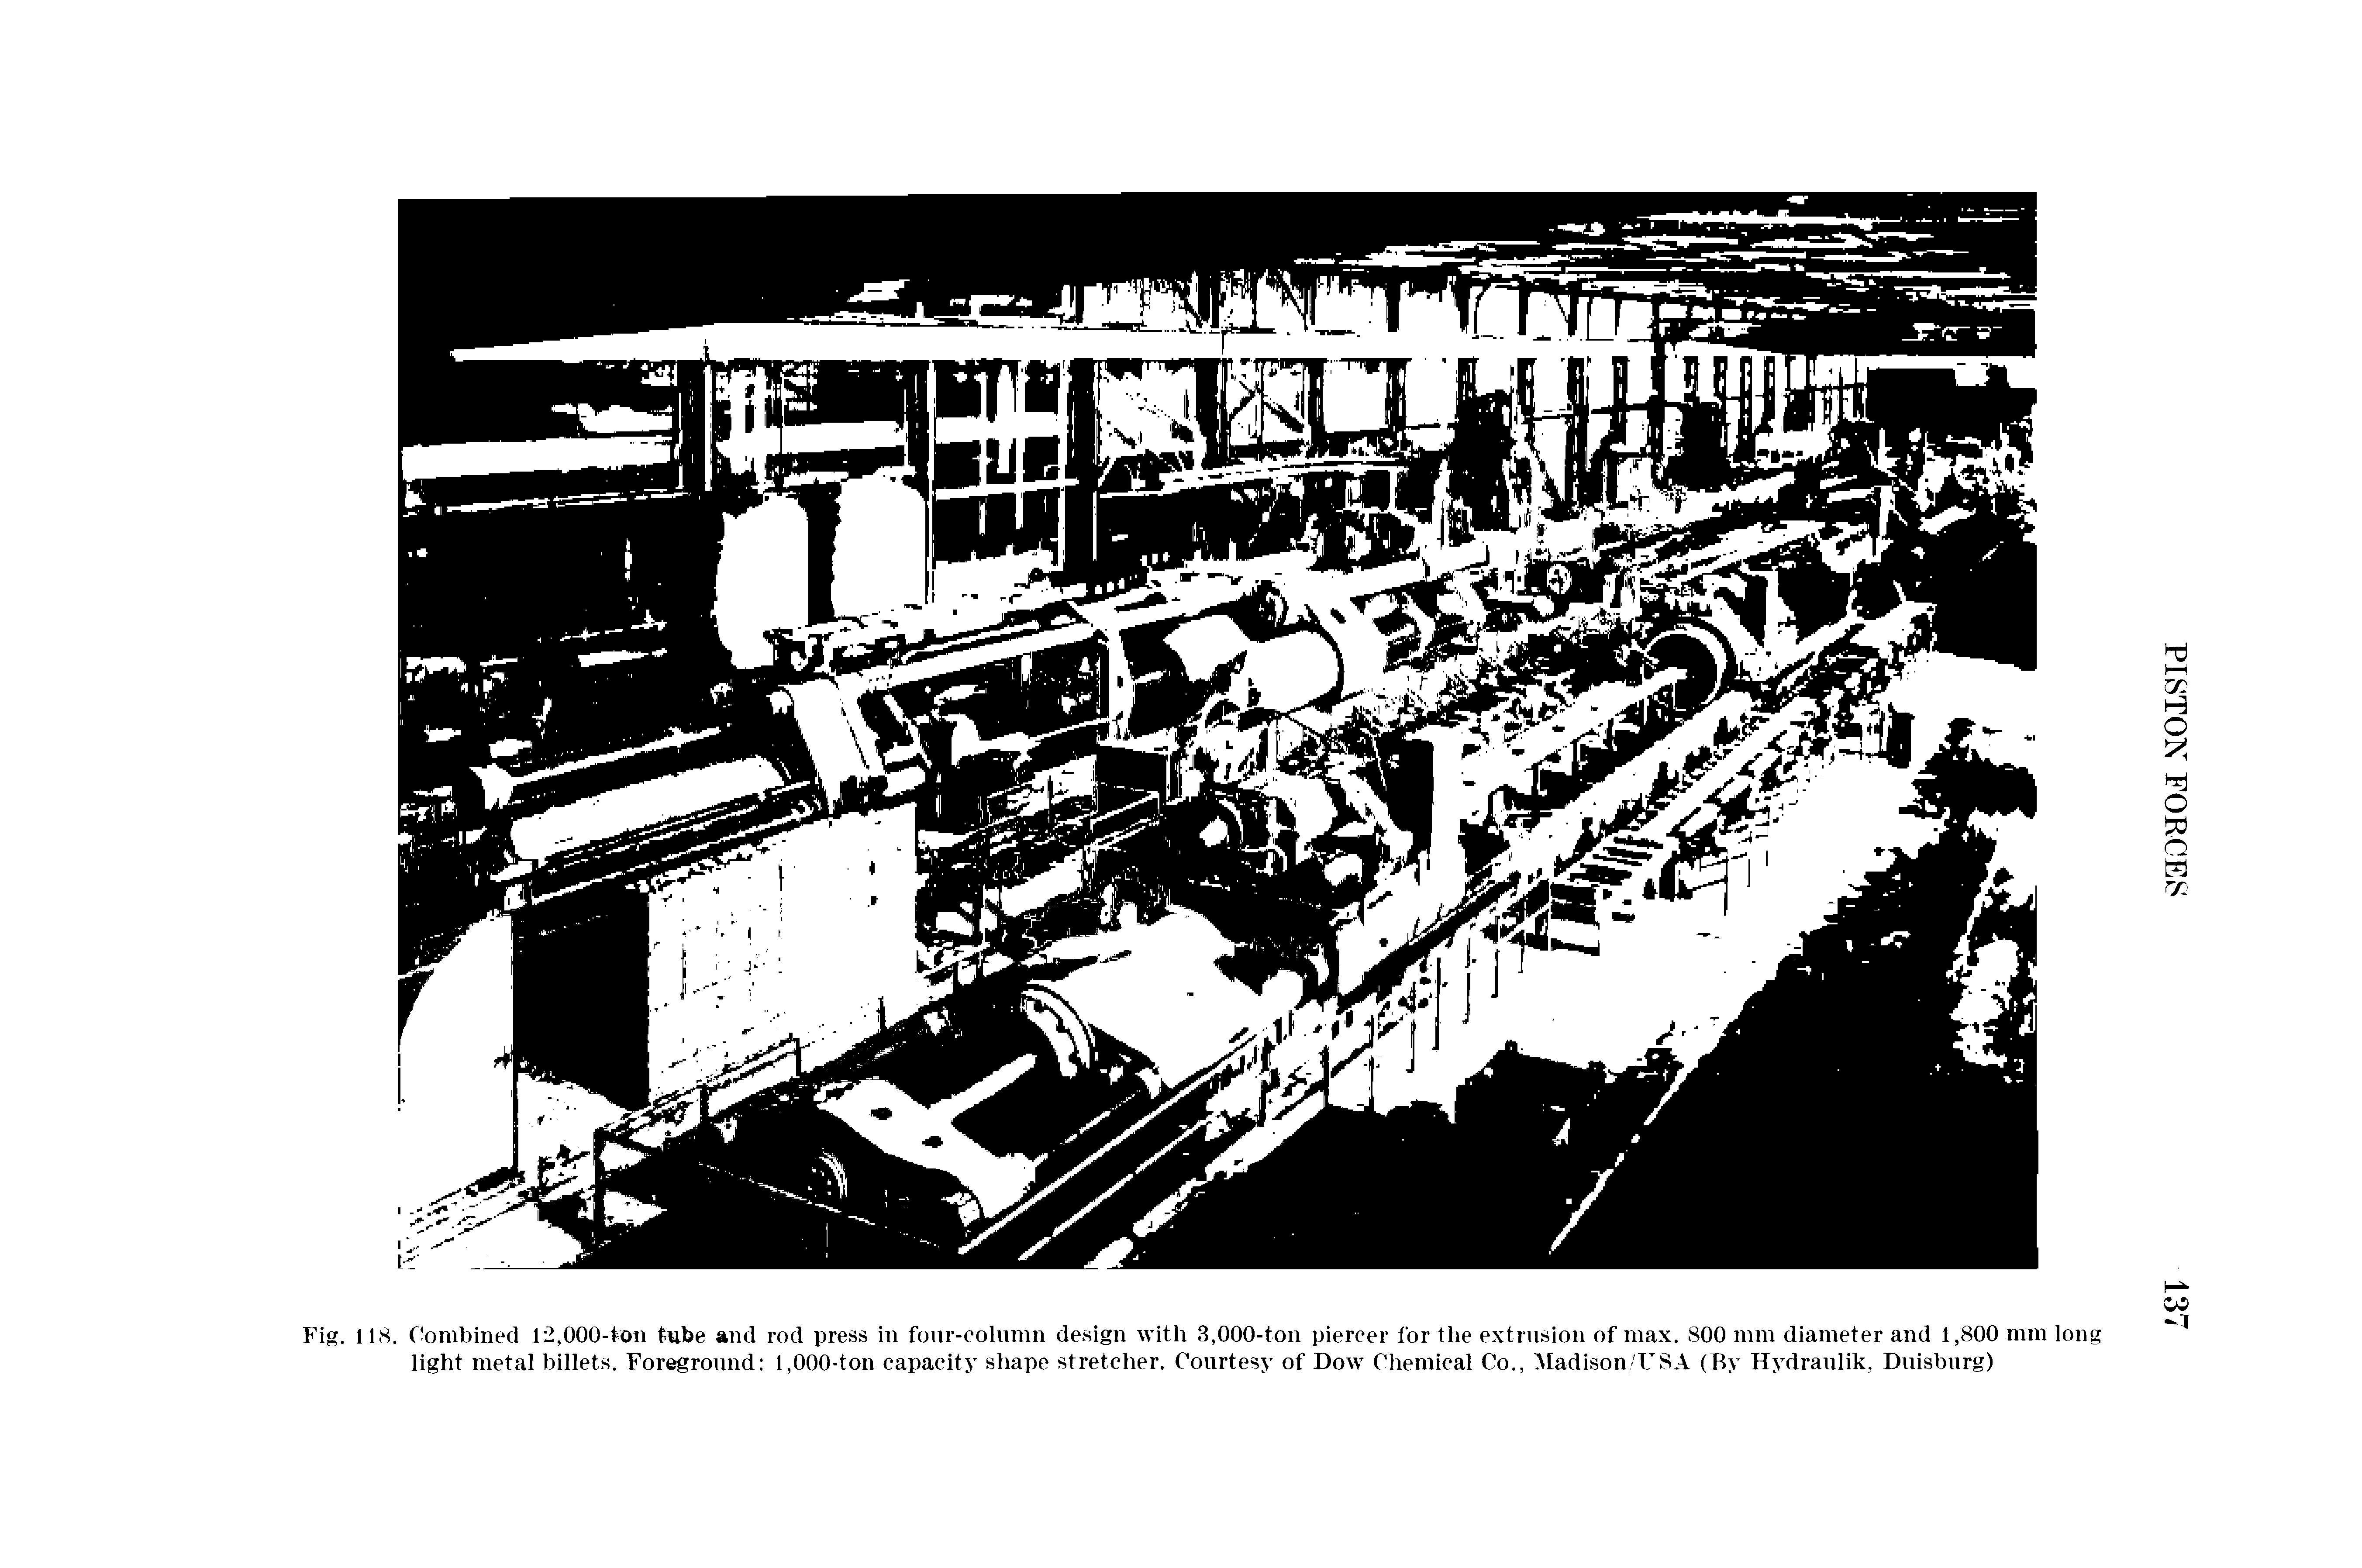 Fig. 118. Combined 12,000-bon tube and rod press in four-column design with 3,000-ton piercer for the extrusion of max. 800 mm diameter and 1,800 mm long light metal billets. Foreground 1,000-ton capacity shape stretcher. Courtesy of Dow Chemical Co., Madison USA (By Hydraulik, Duisburg)...